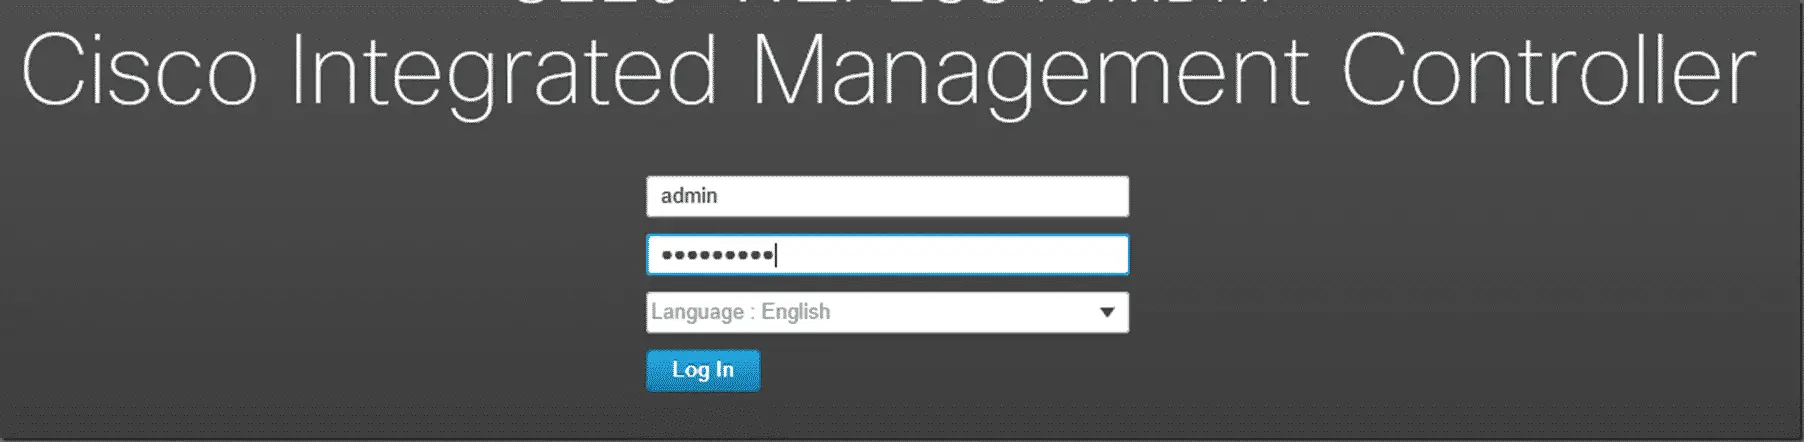 Log into the Cisco Integrated Manager Controller UI. 